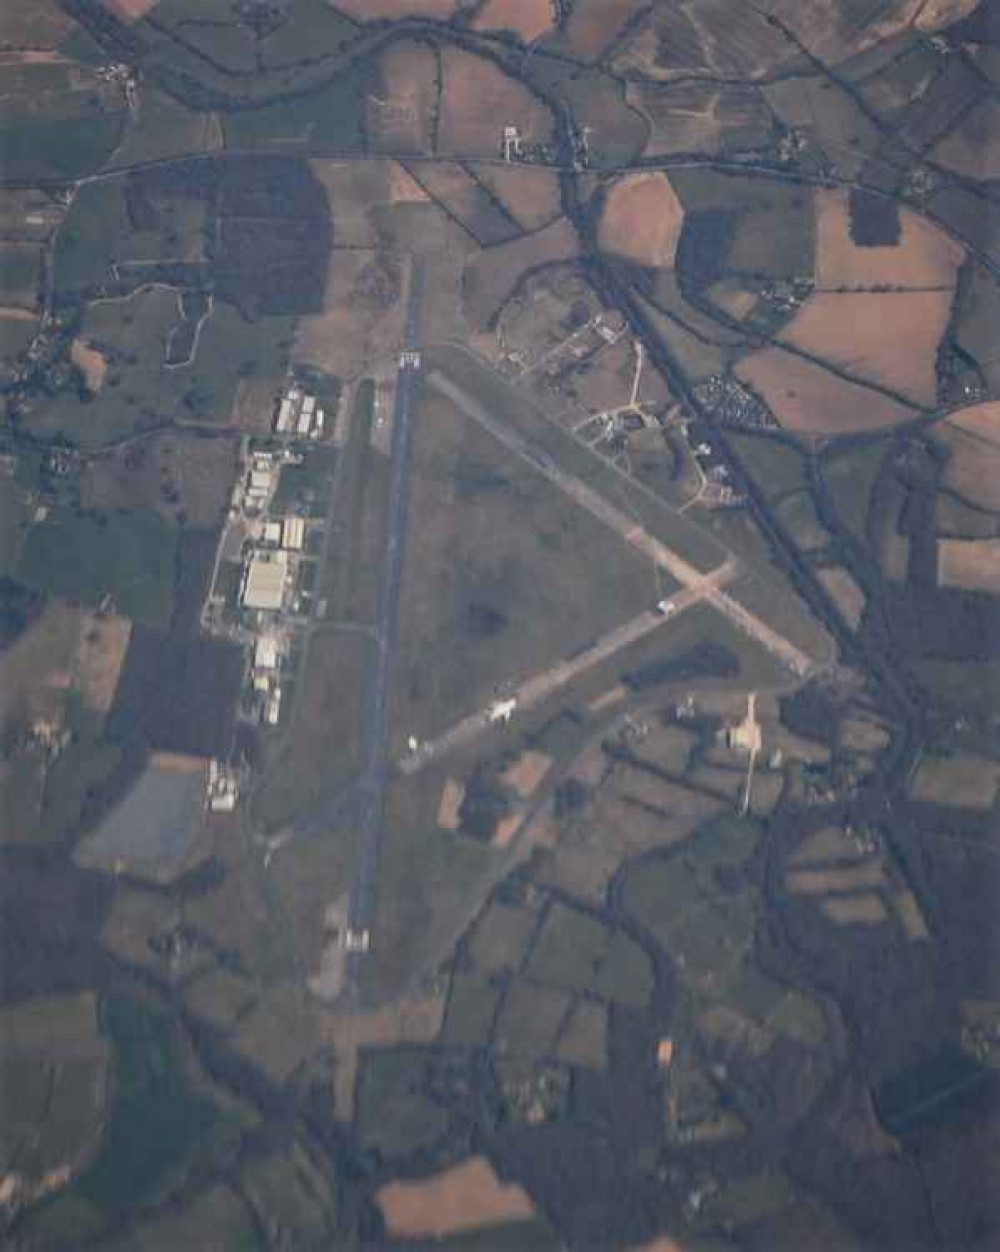 Dunsfold Aerodrome from the air.